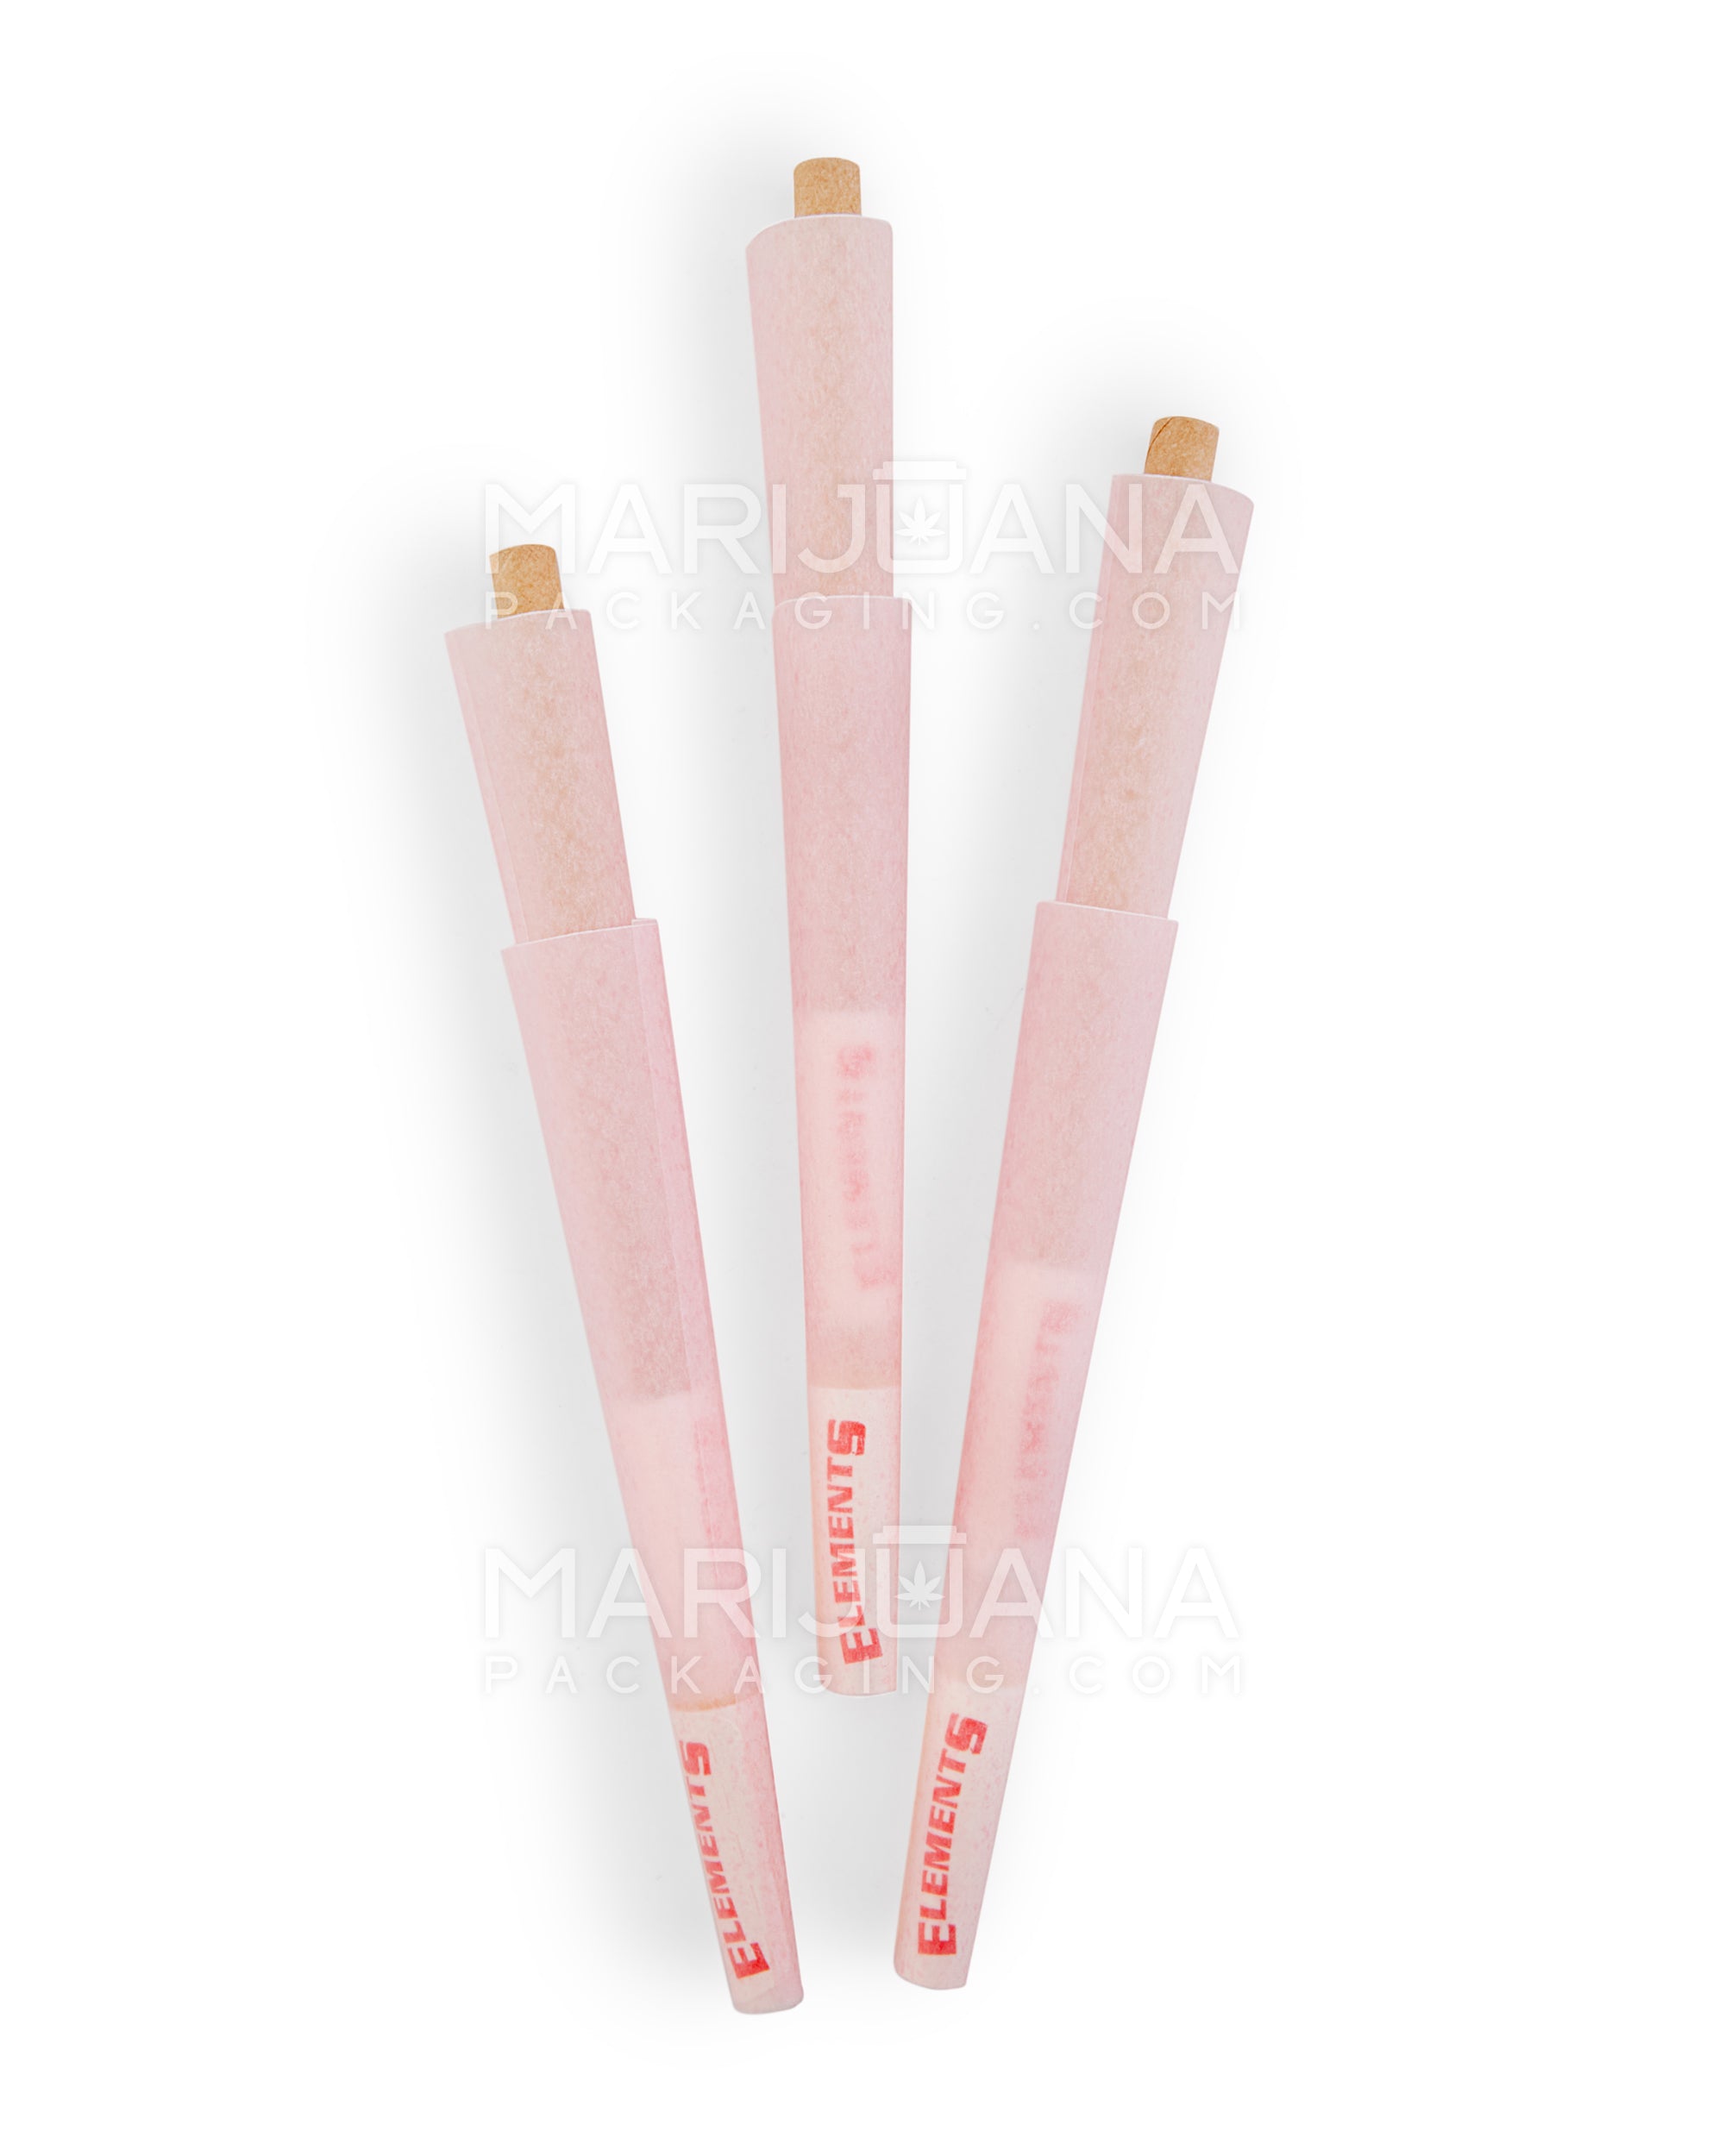 ELEMENTS | 'Retail Display' 1 1/4 Size Ultra Thin Pre-Rolled Cones | 84mm - Pink Rice Paper - 32 Count - 3